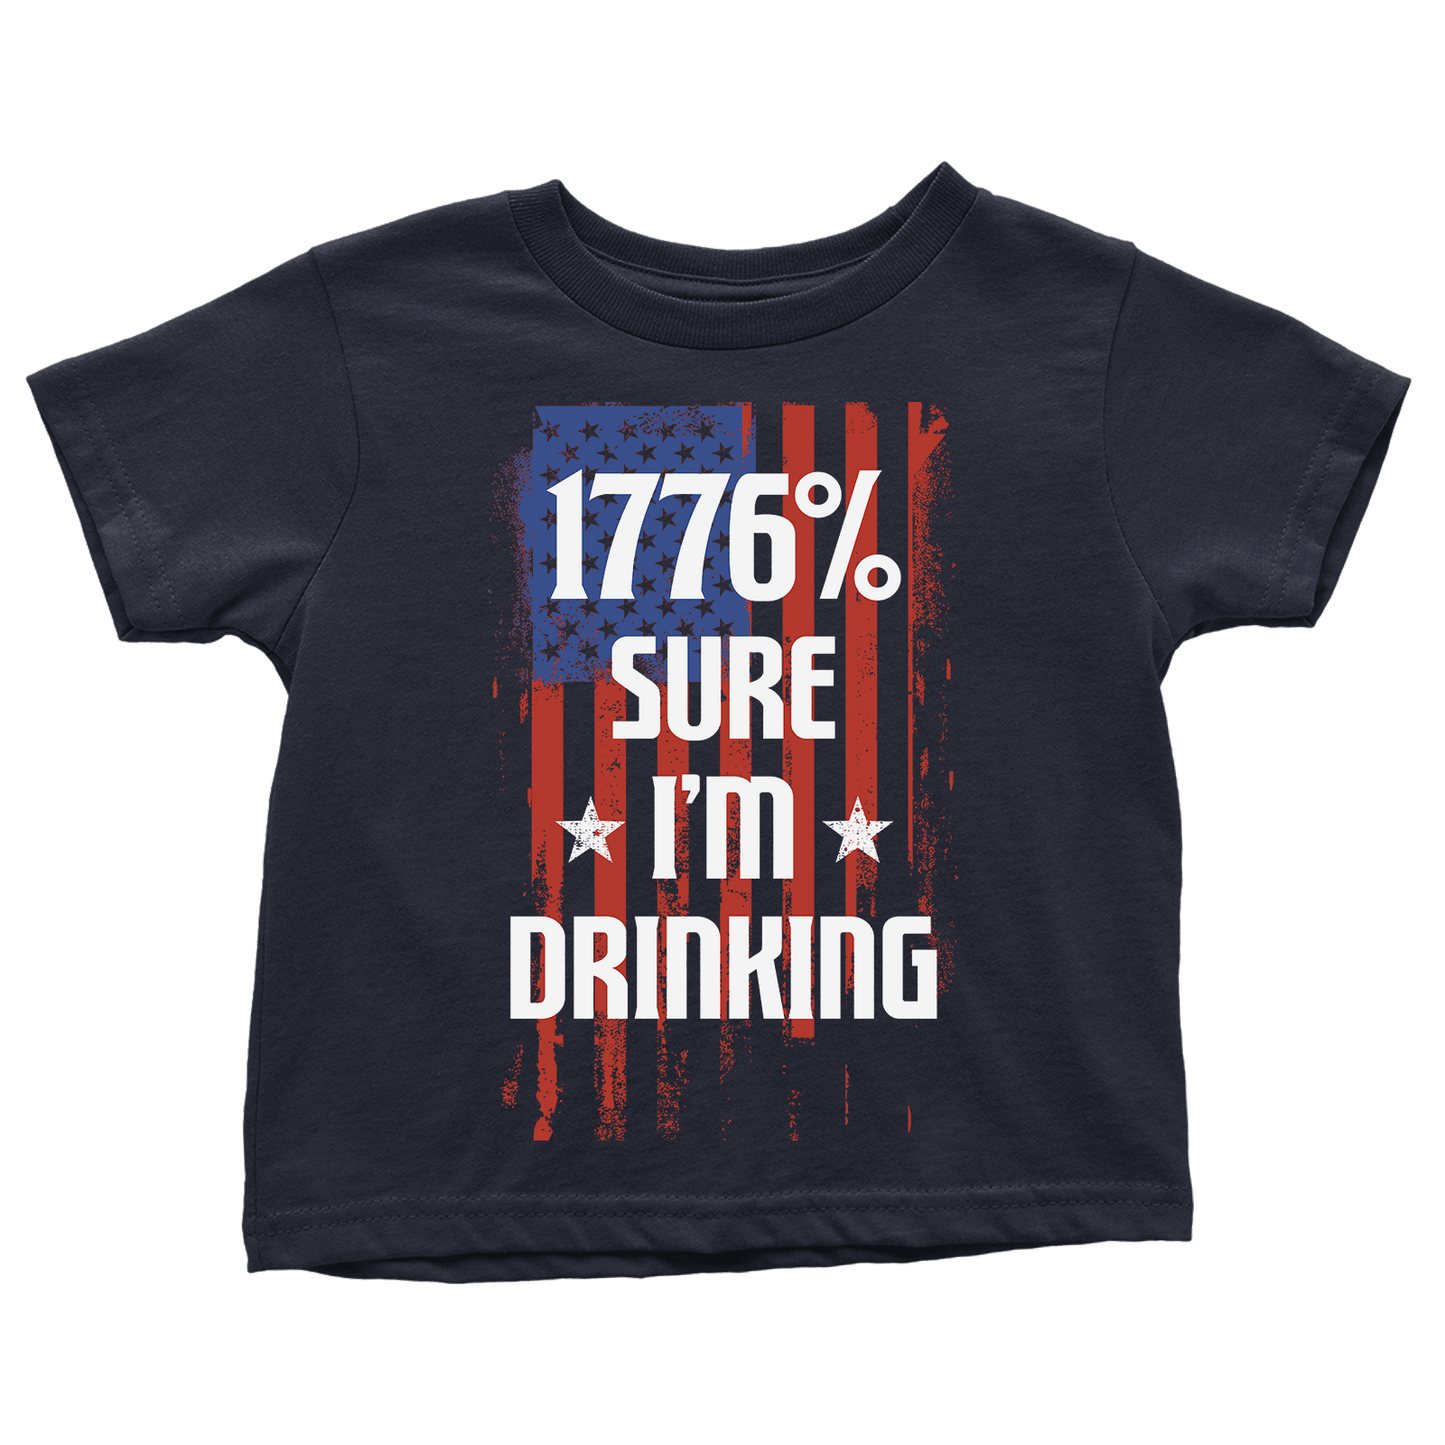 Apparel Premium Toddler Shirt / Navy / 2T 1776 Percent Sure I'm Drinking - Toddlers